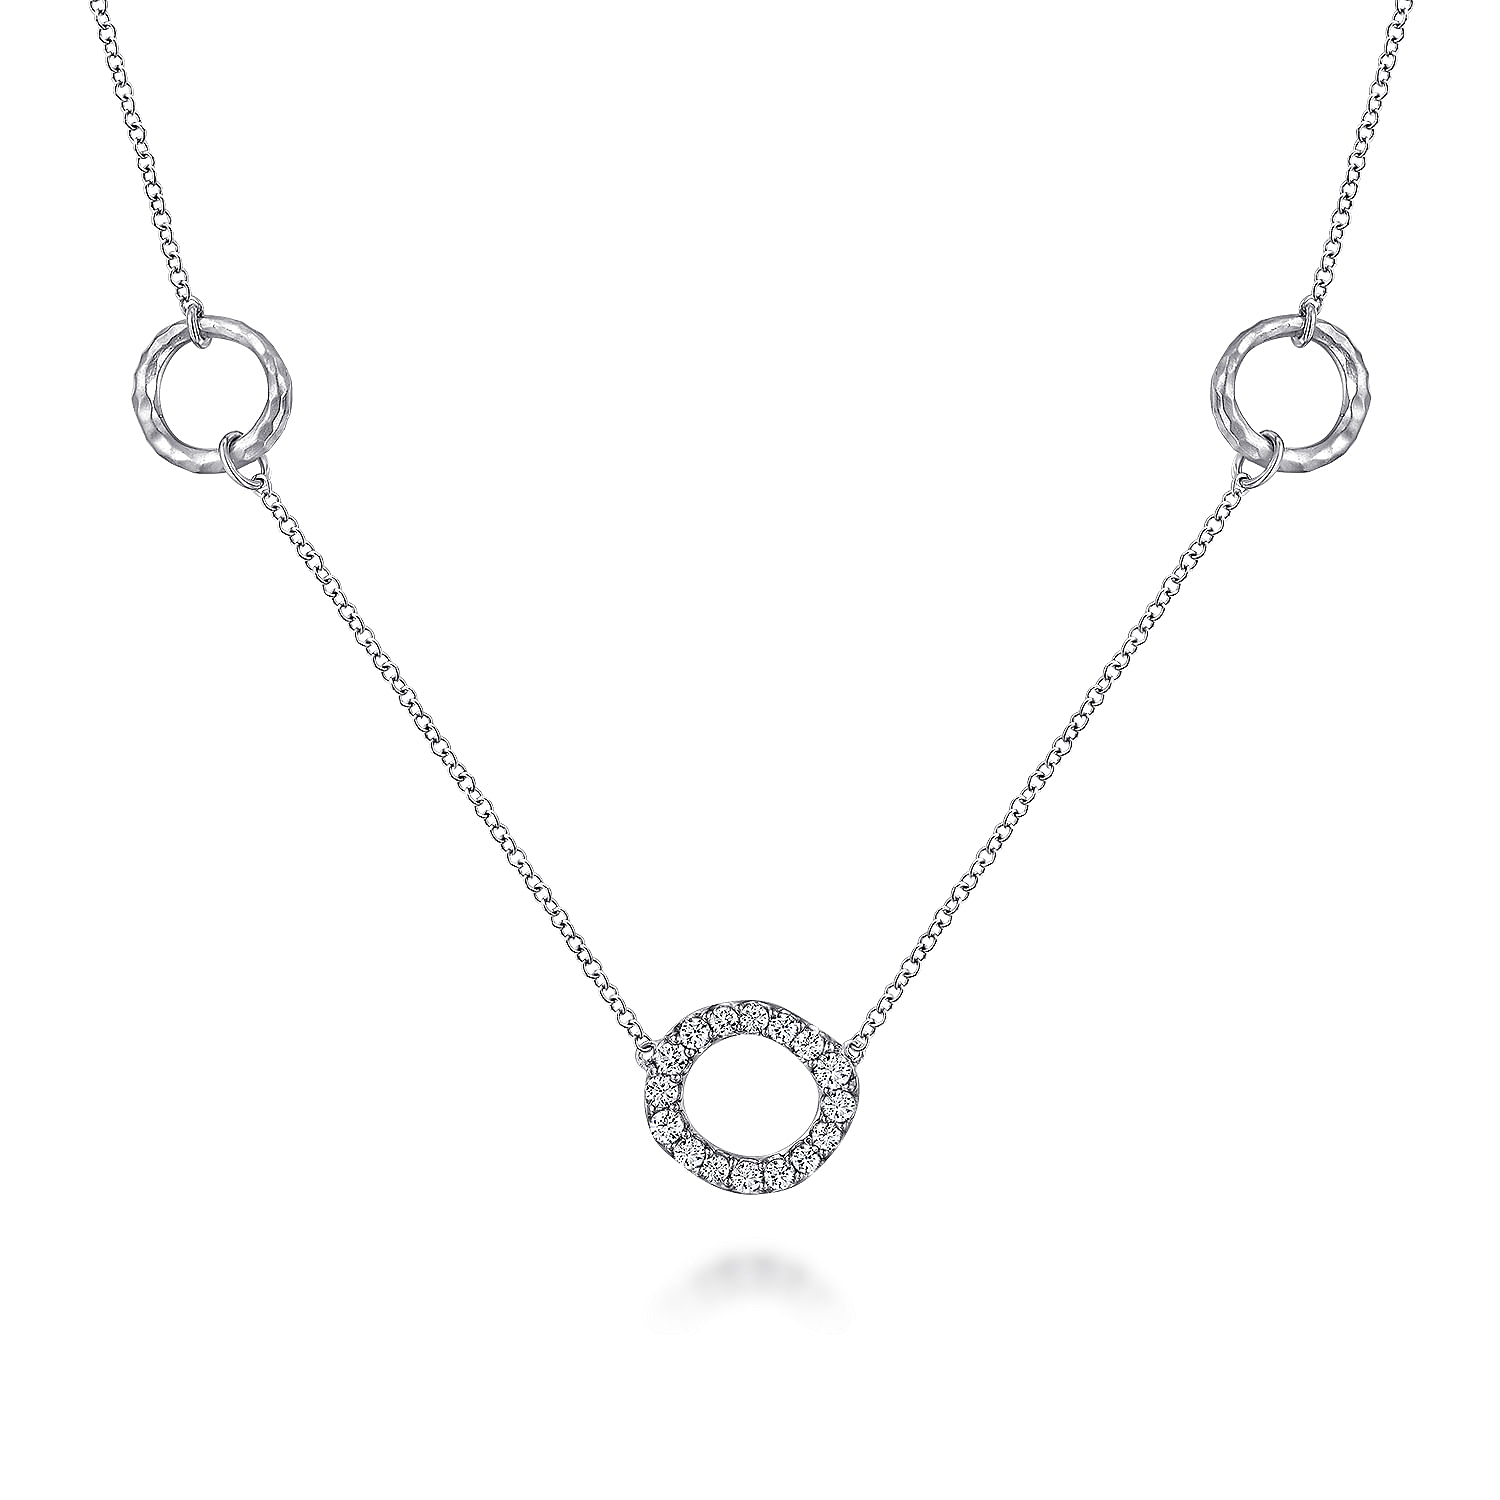 Hammered 925 Sterling Silver and White Sapphire Circle Station Necklace